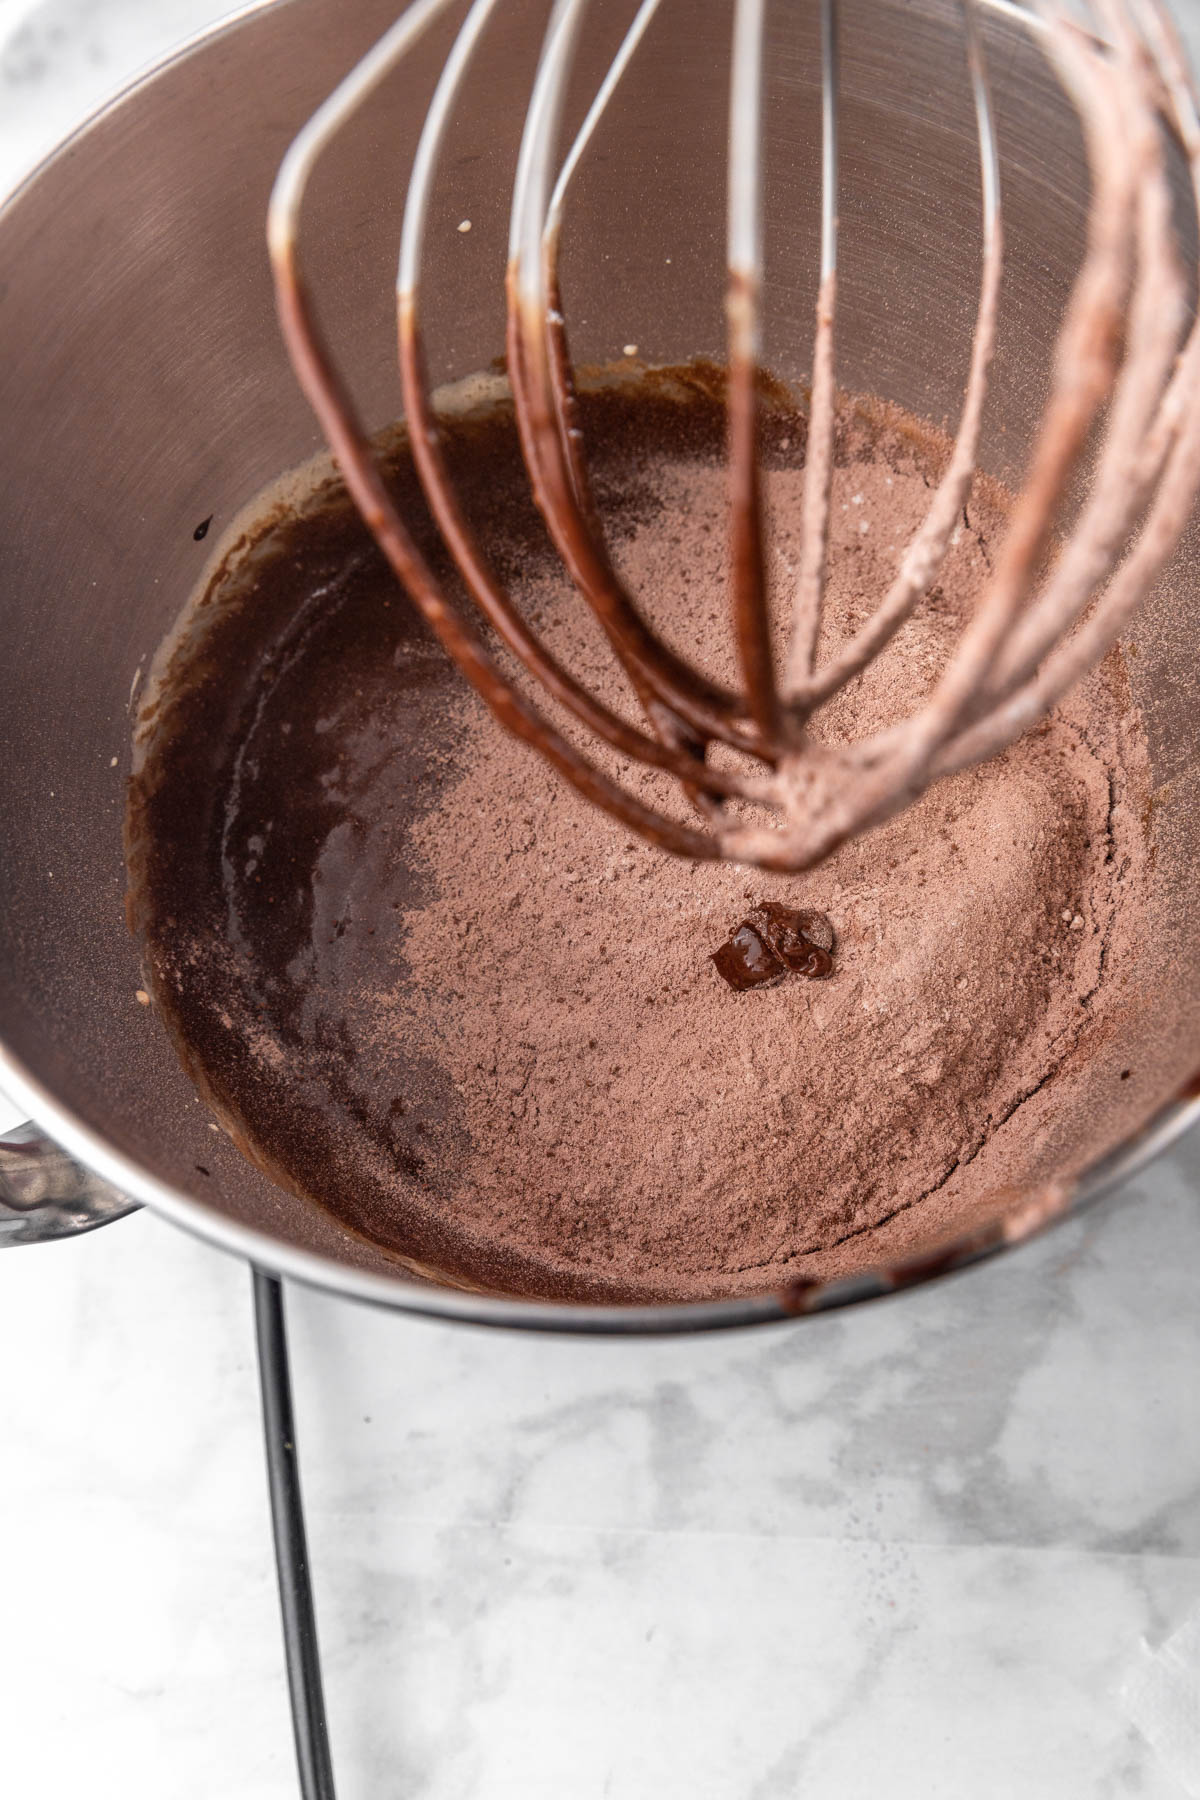 dry ingredients being added to brownie cookie batter in mixer bowl.